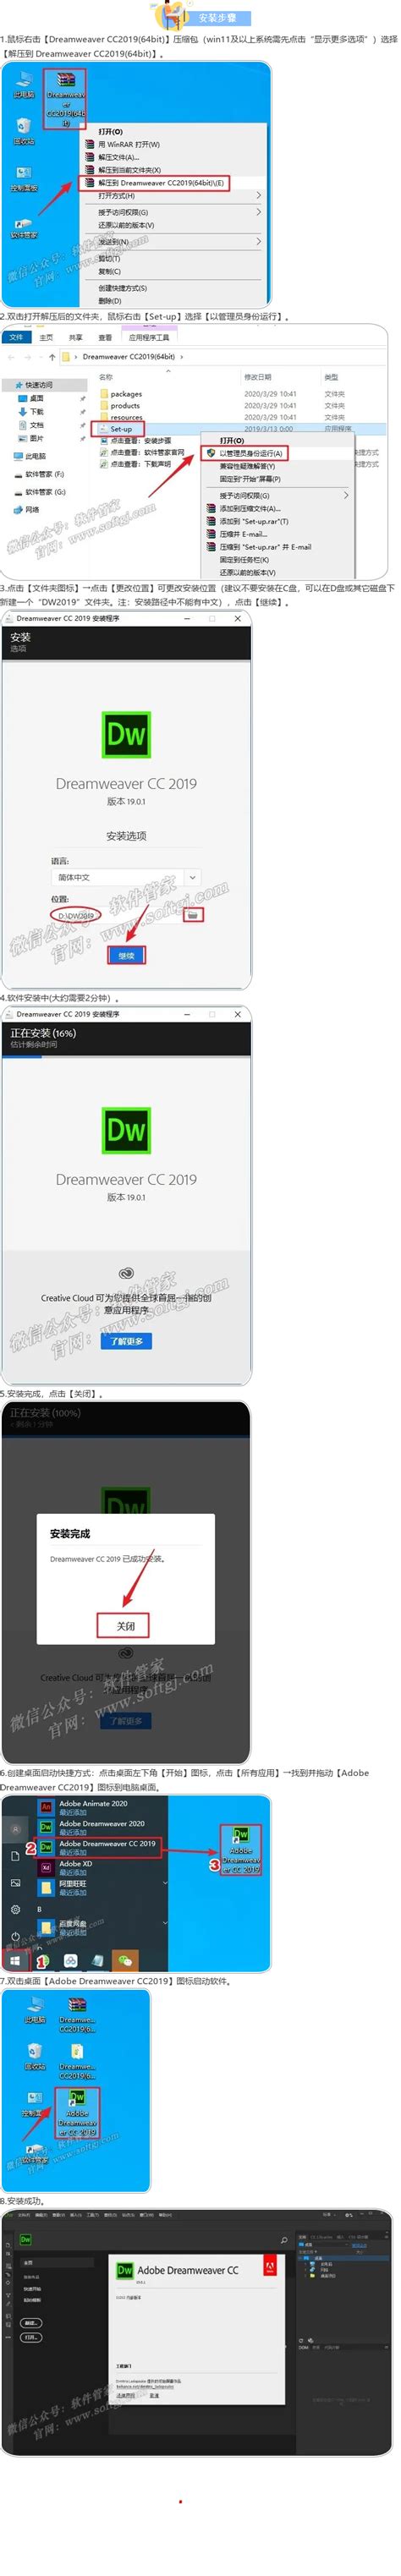 Adobe Dreamweaver 2021 Overview and Supported File Types